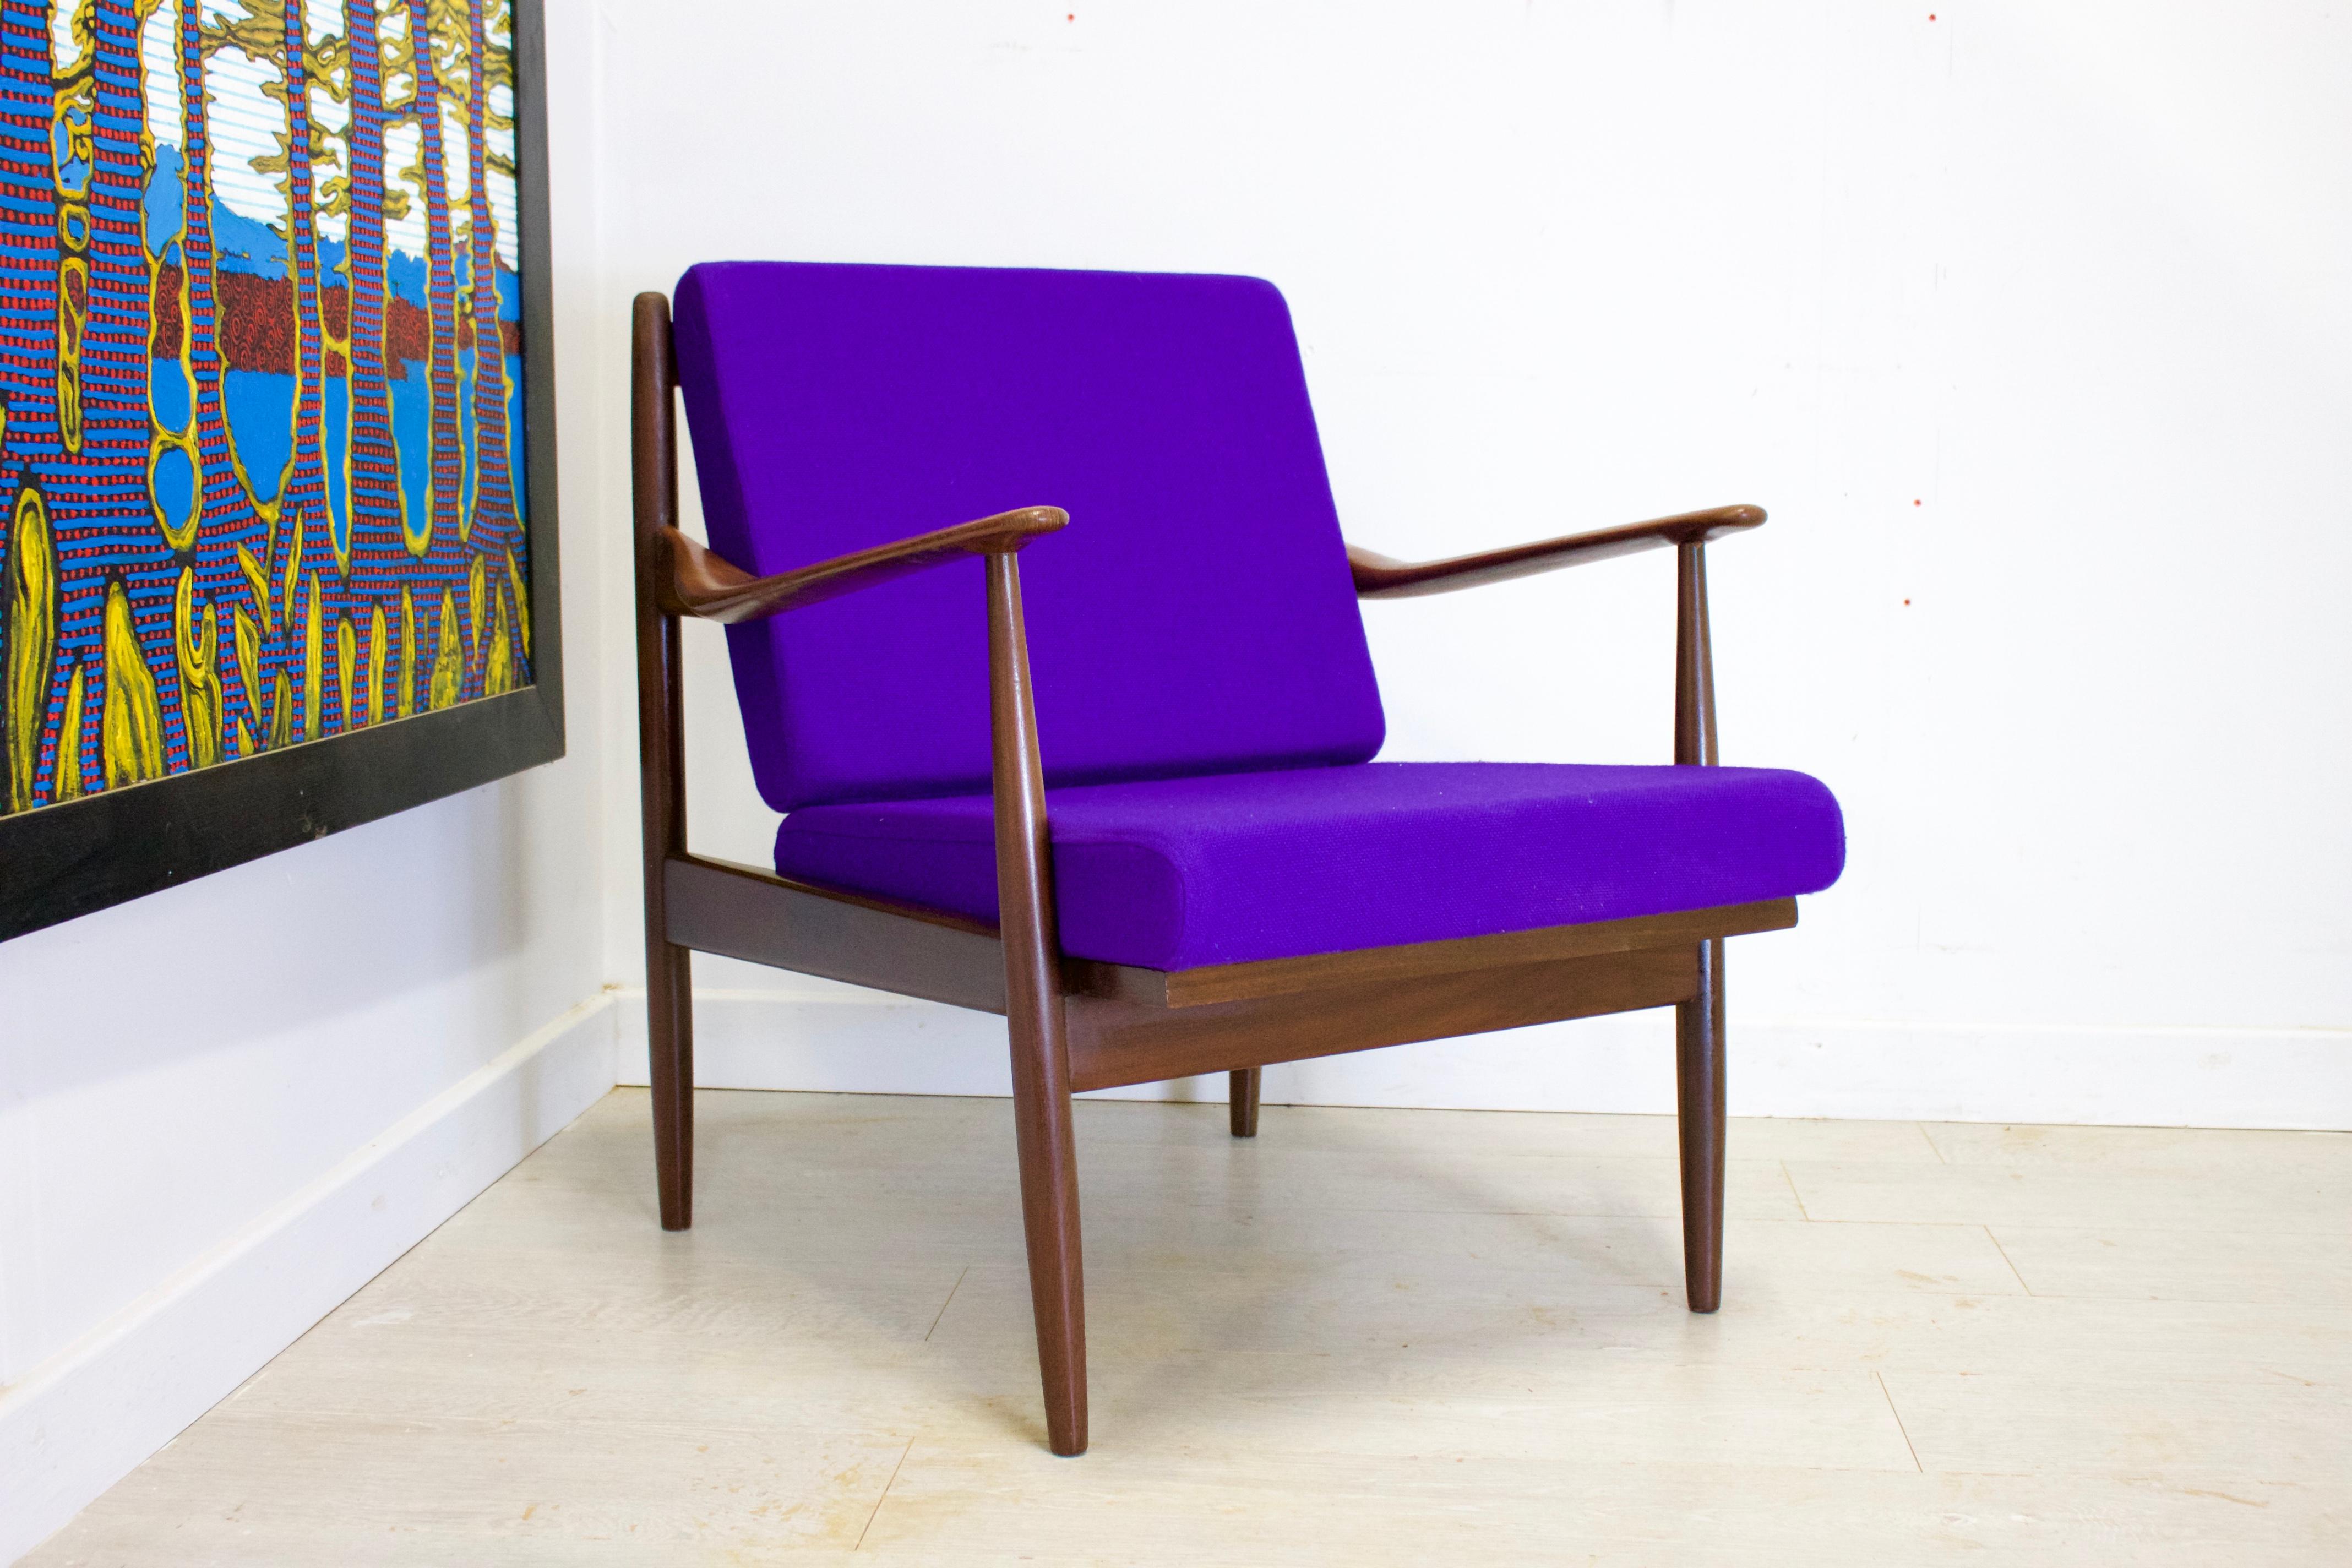 Midcentury design

- Mid-Century Modern armchair
- Made in Denmark or Sweden
- Featuring purple upholstery 
- Recently reupholstered with new webbing
- Made of teak.